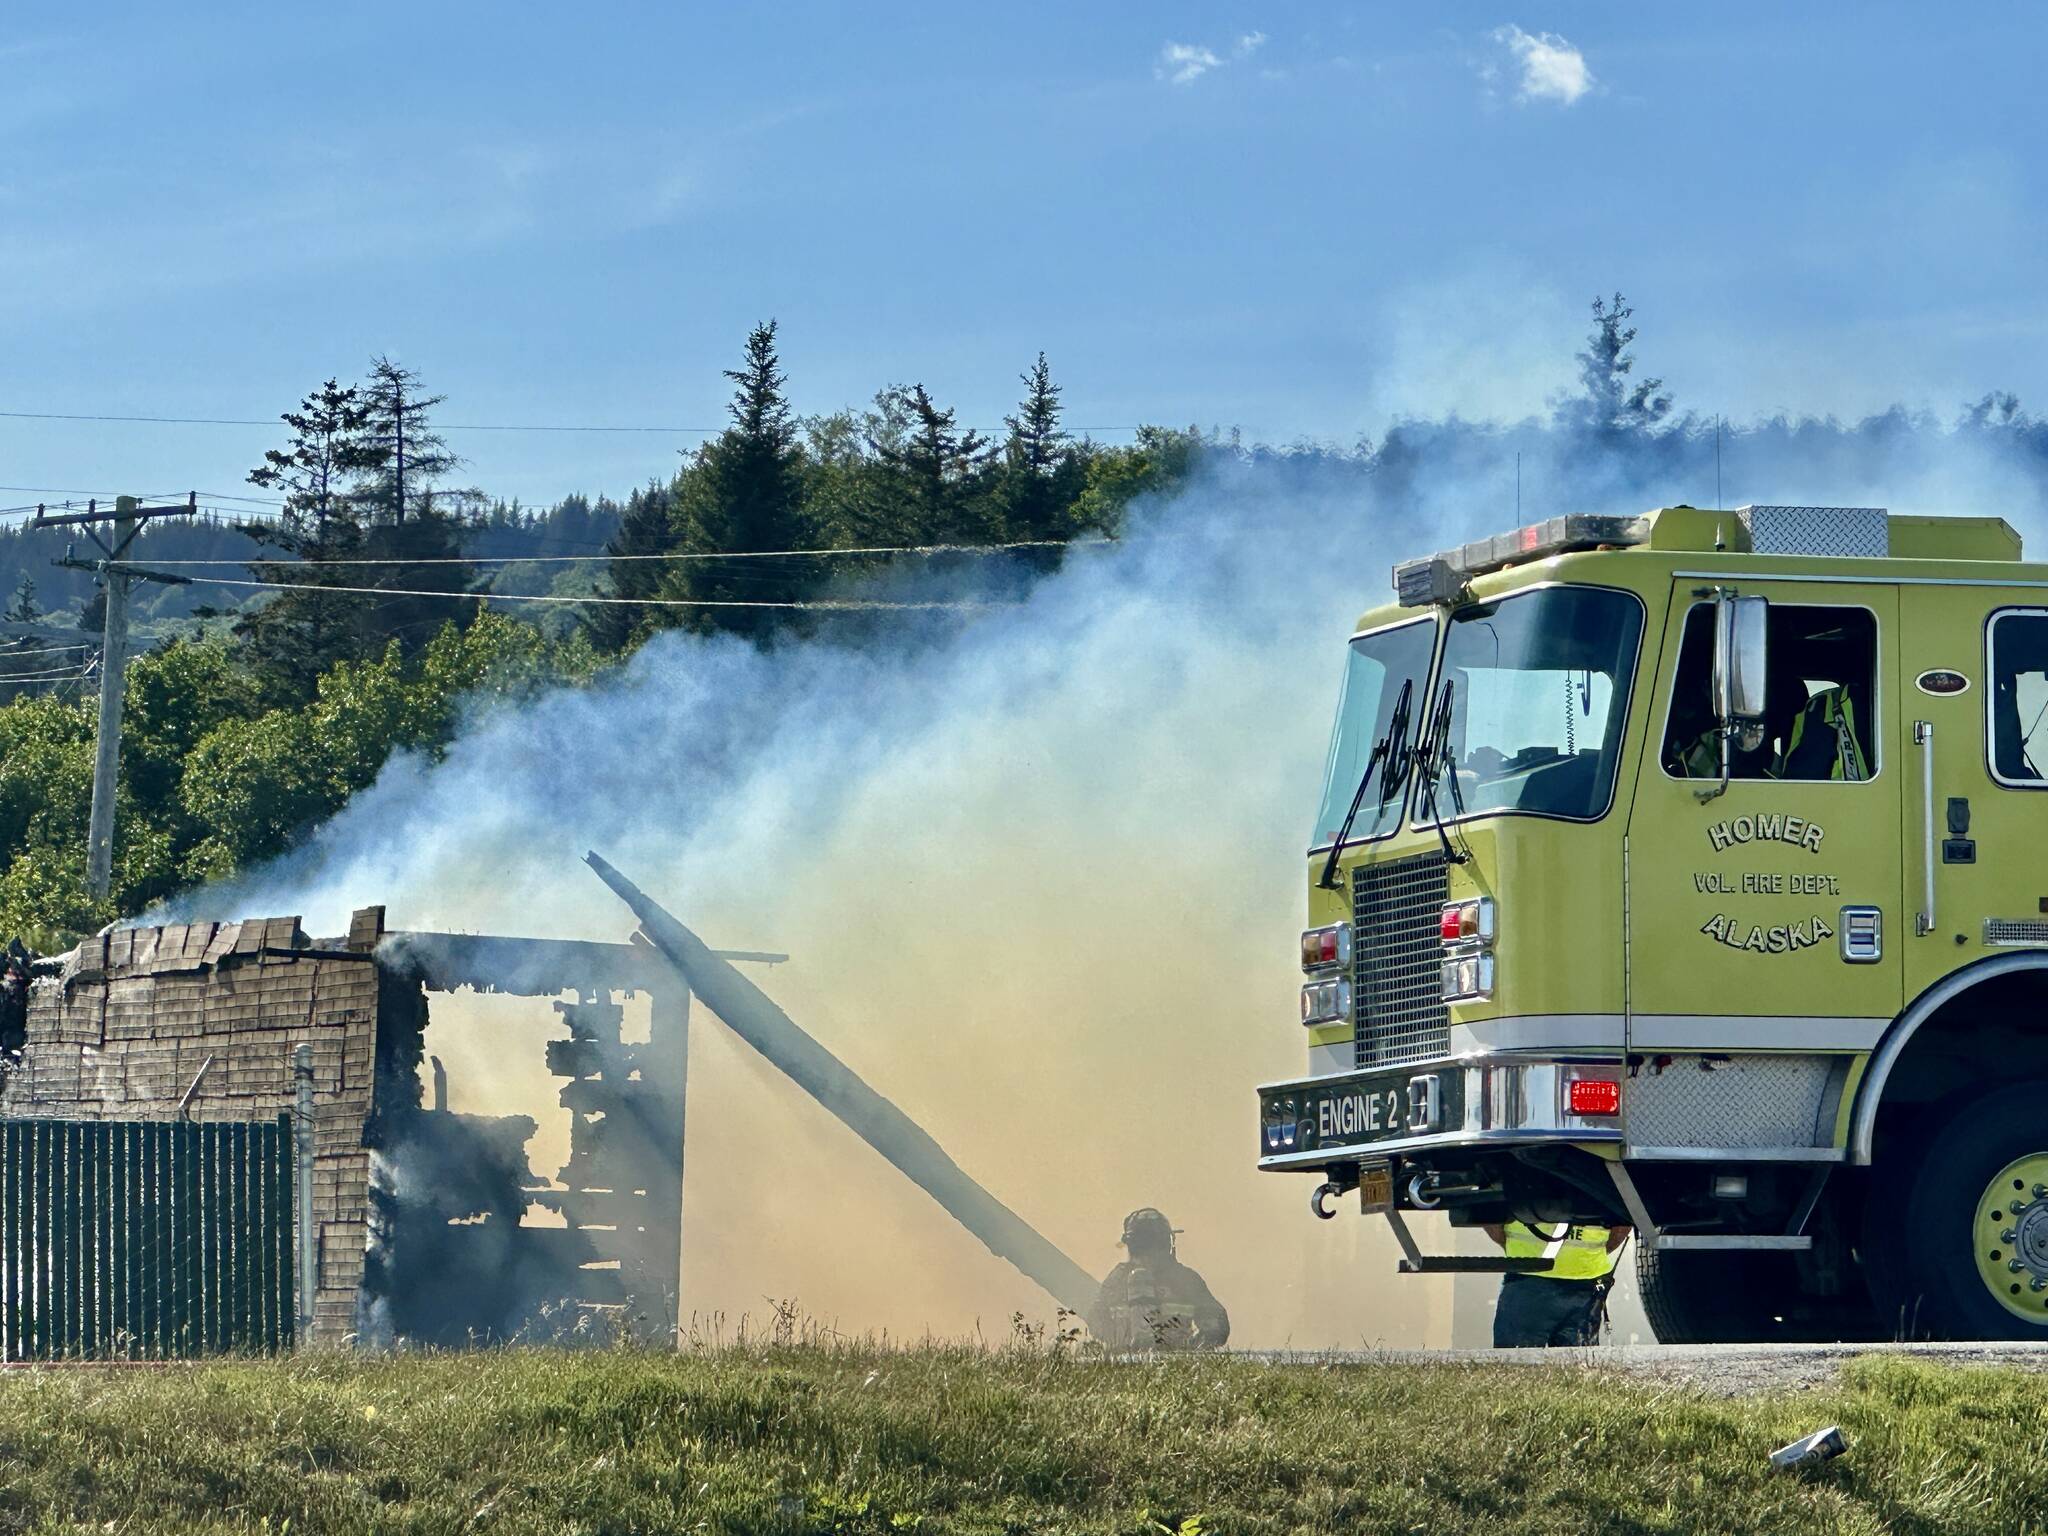 Homer Volunteer Fire Department works to extinguish an abandoned building on Lake Street on Friday, June 21, in Homer, Alaska. (Photo by Christina Whiting/courtesy)